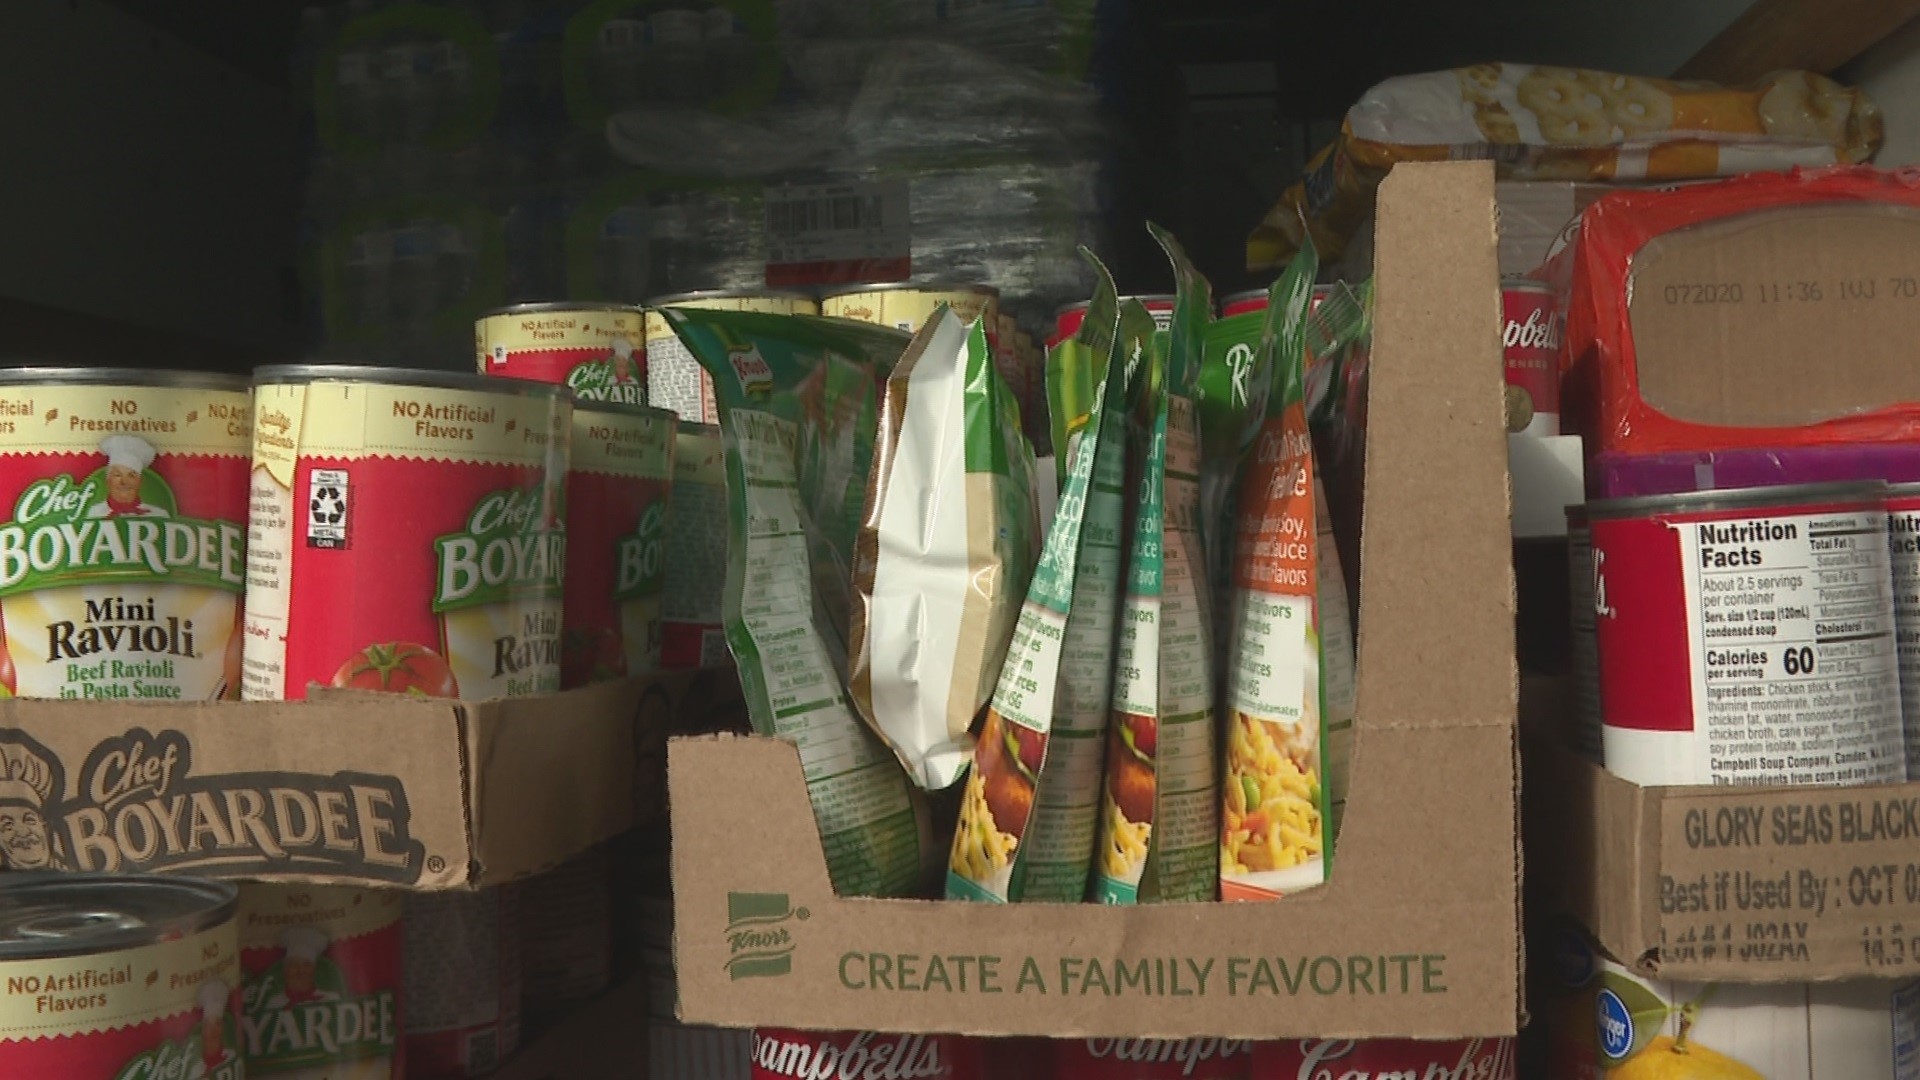 Troy King planned to buy supplies himself to drive down, but the Louisville community stepped in to help.